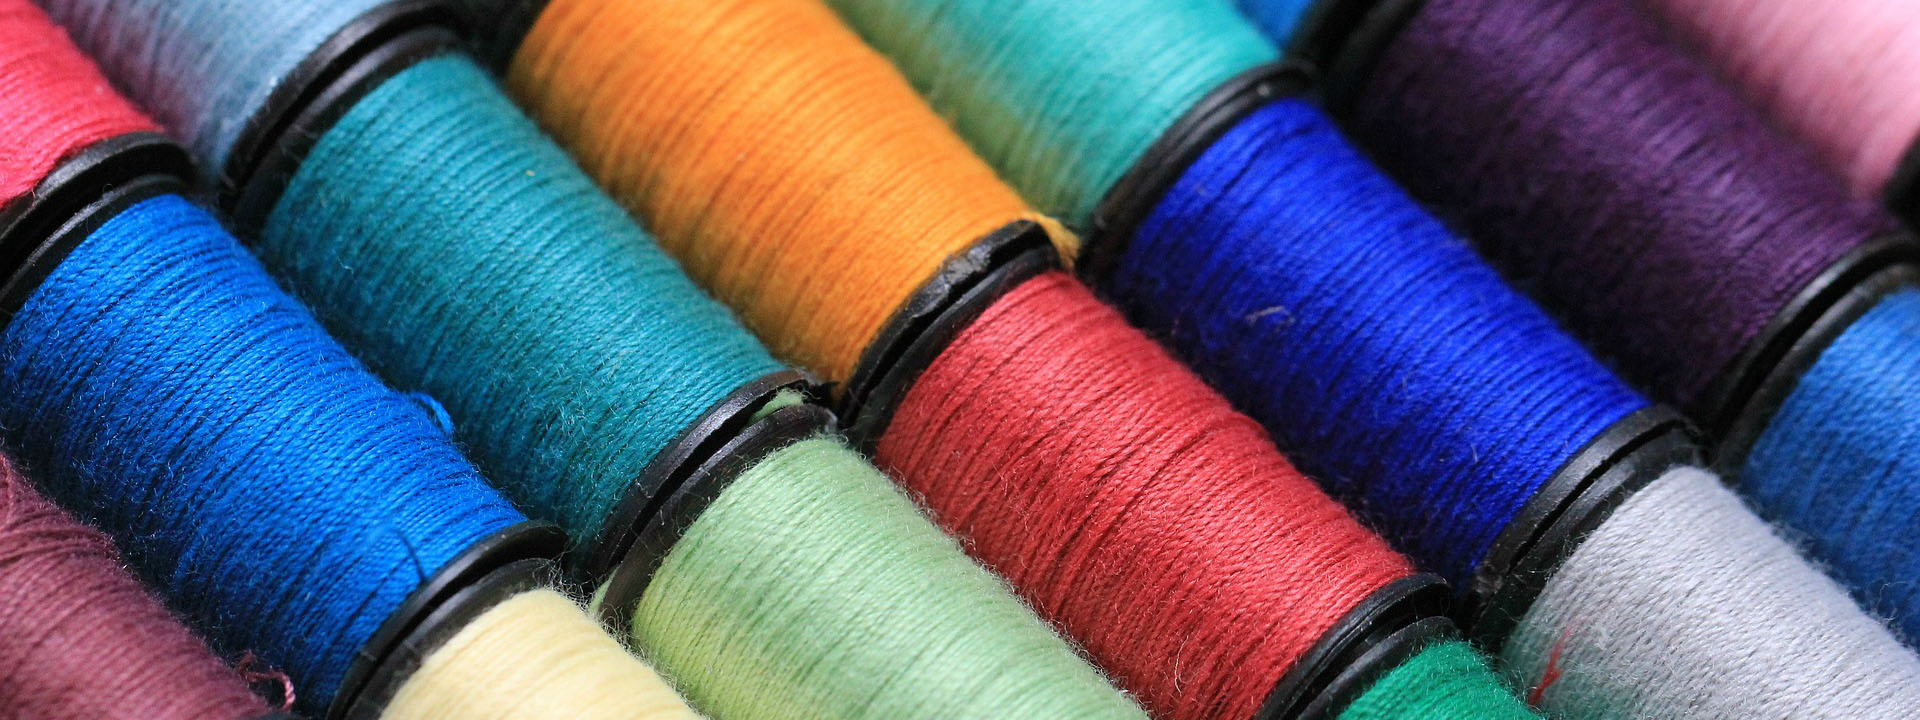 Textiles major readies the talent yarn for future